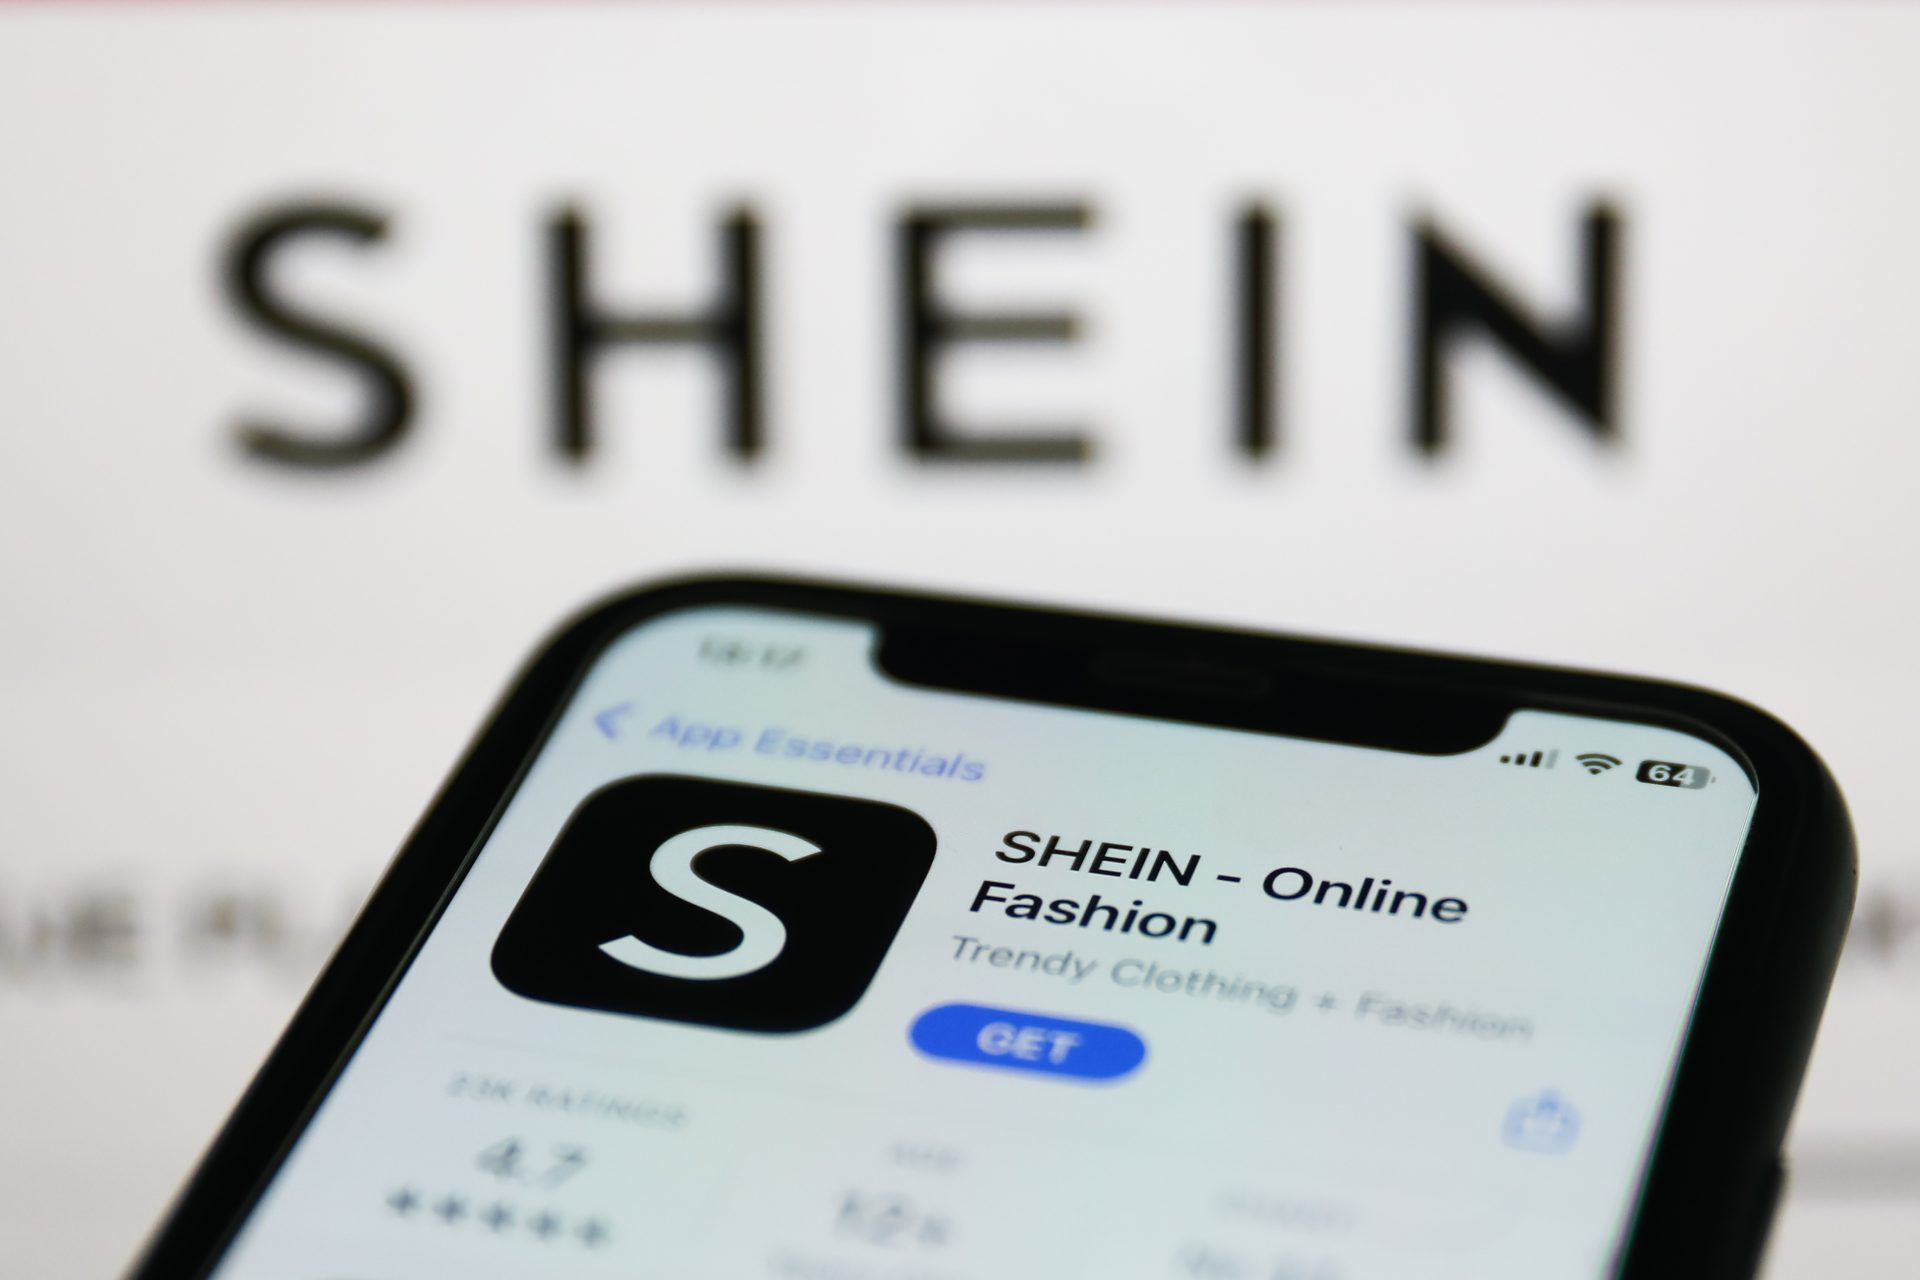 SHEIN Named In RICO ‘Racketeering’ & ‘Copyright Infringement’ Lawsuit